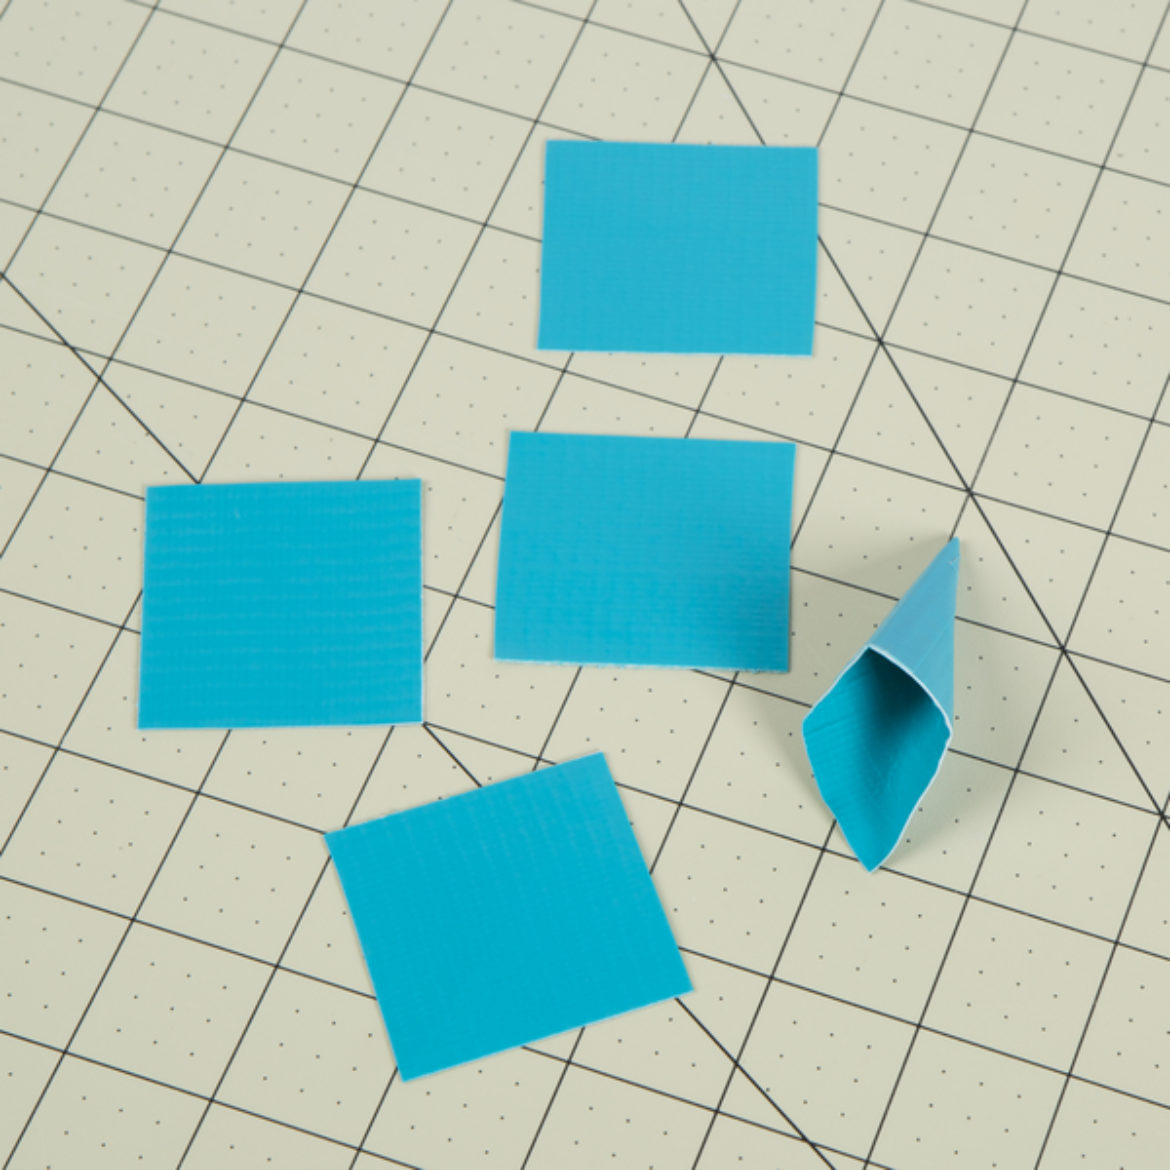 Squares from previous step folded into a cone shap and held in place with a small piece of tape